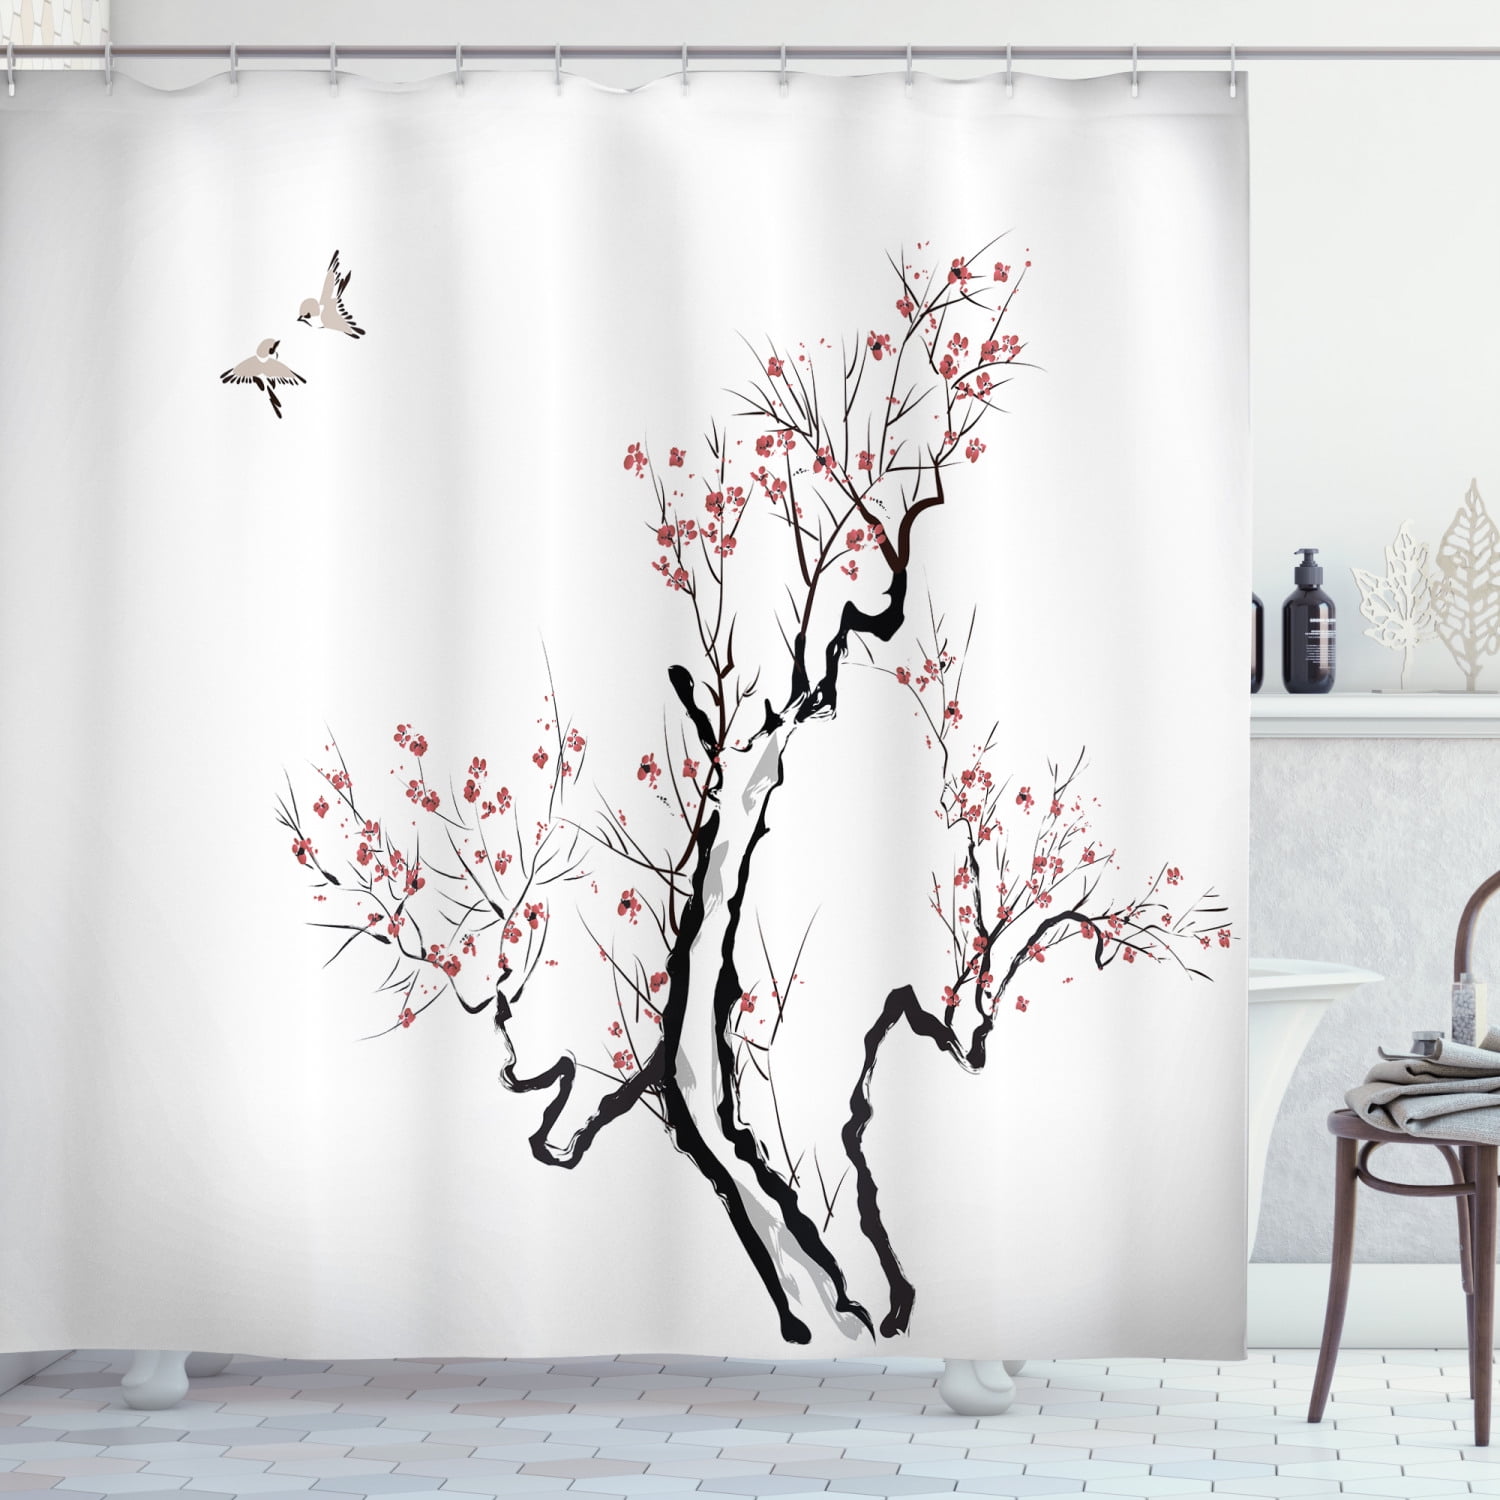 Branch Flower Bloom Shower Curtain Bath Accessory Sets Polyester Fabric Hooks 